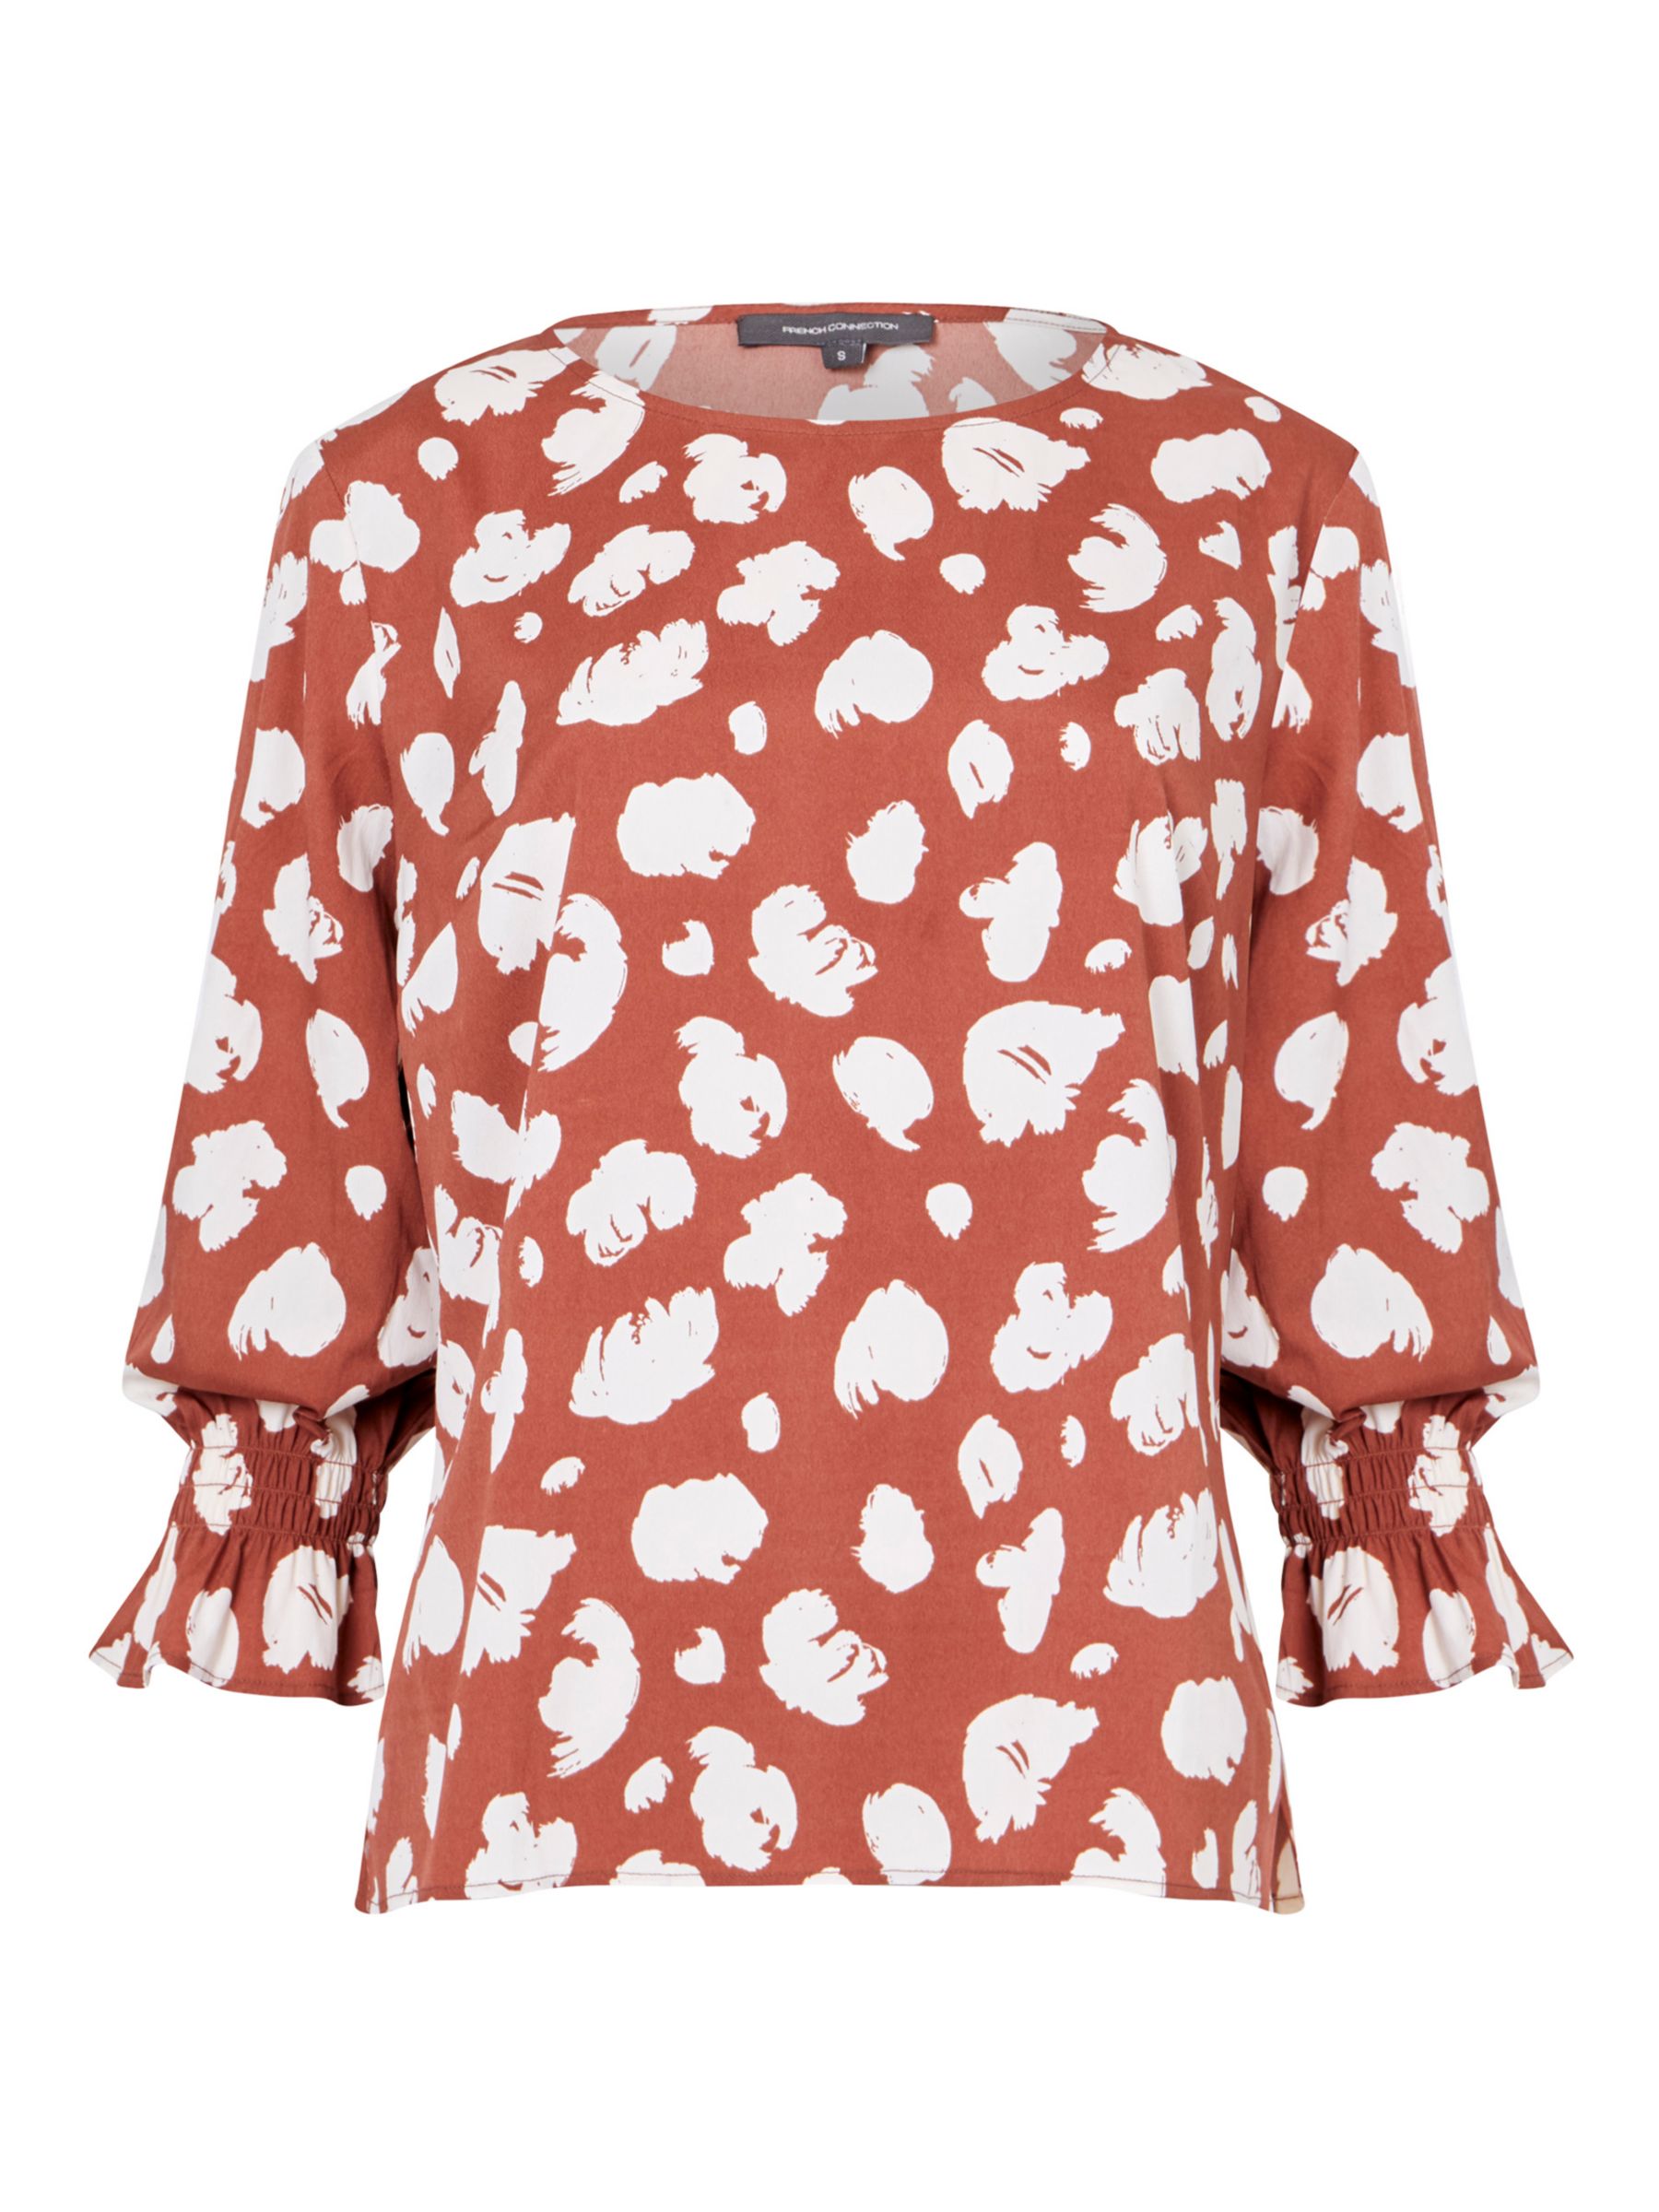 French Connection Animal Print Crepe Blouse, Brown/Cream at John Lewis ...